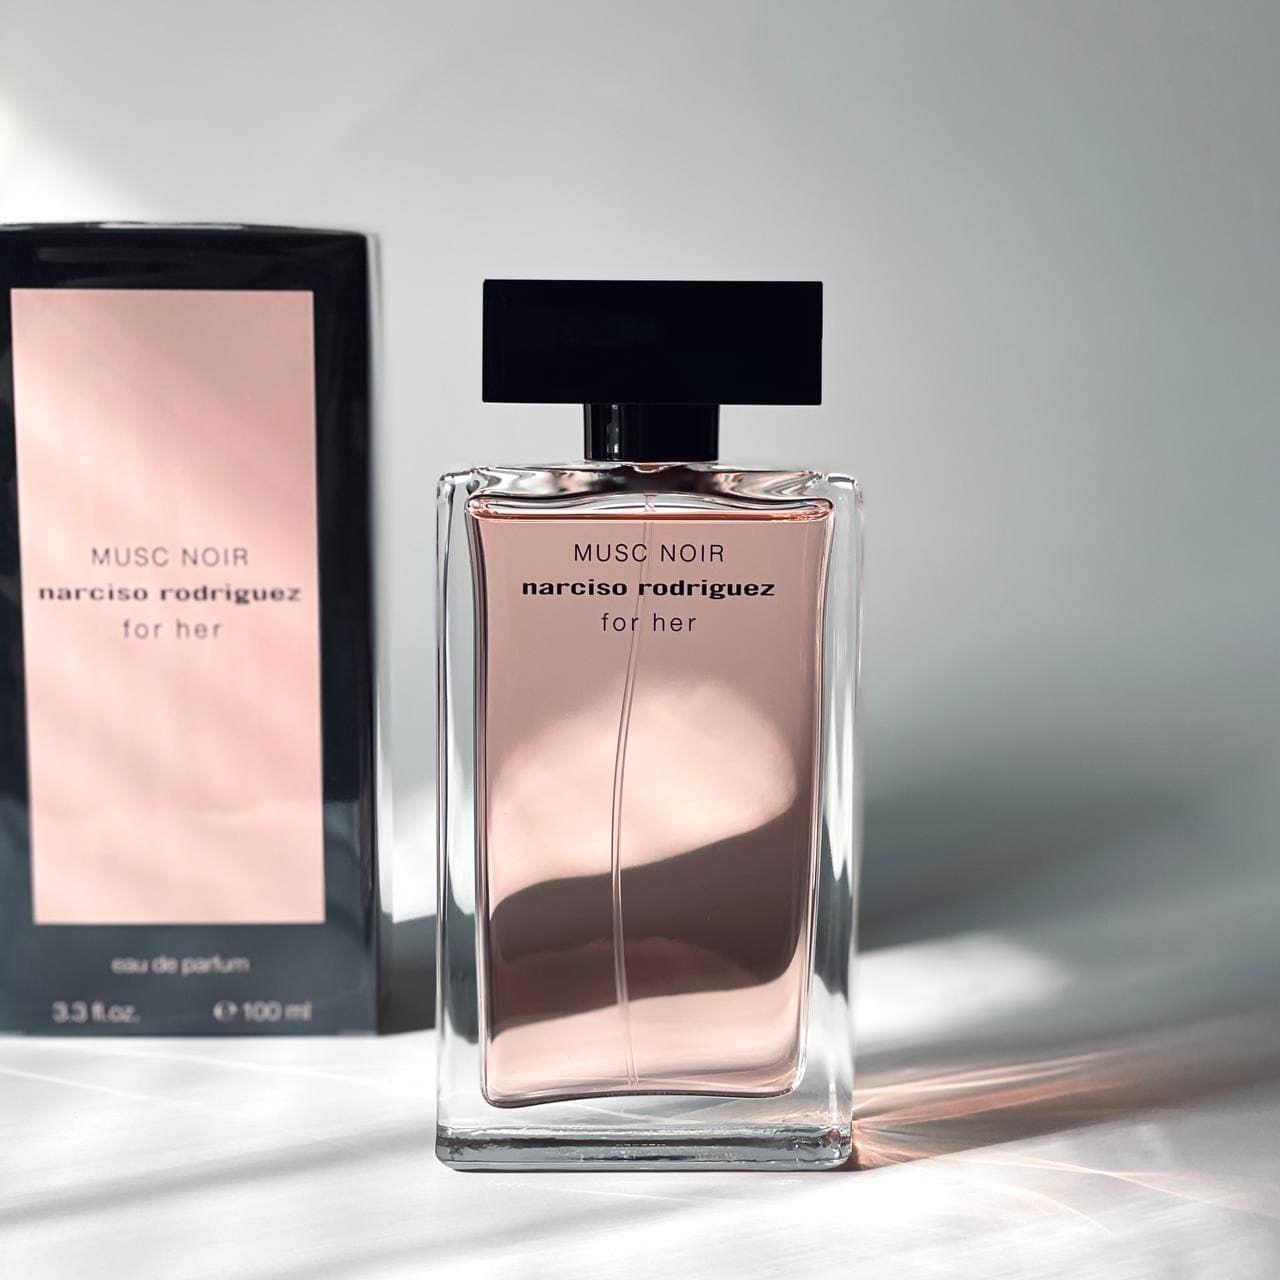 Narciso rodriguez musc noir rose. Musk Noir for her Narciso Rodriguez. Narciso Rodriguez for her 100 мл. МУСК Ноир нарциссо Родригес. Narciso Rodriguez Musc Noir Rose for her EDP (100 мл) Tester.